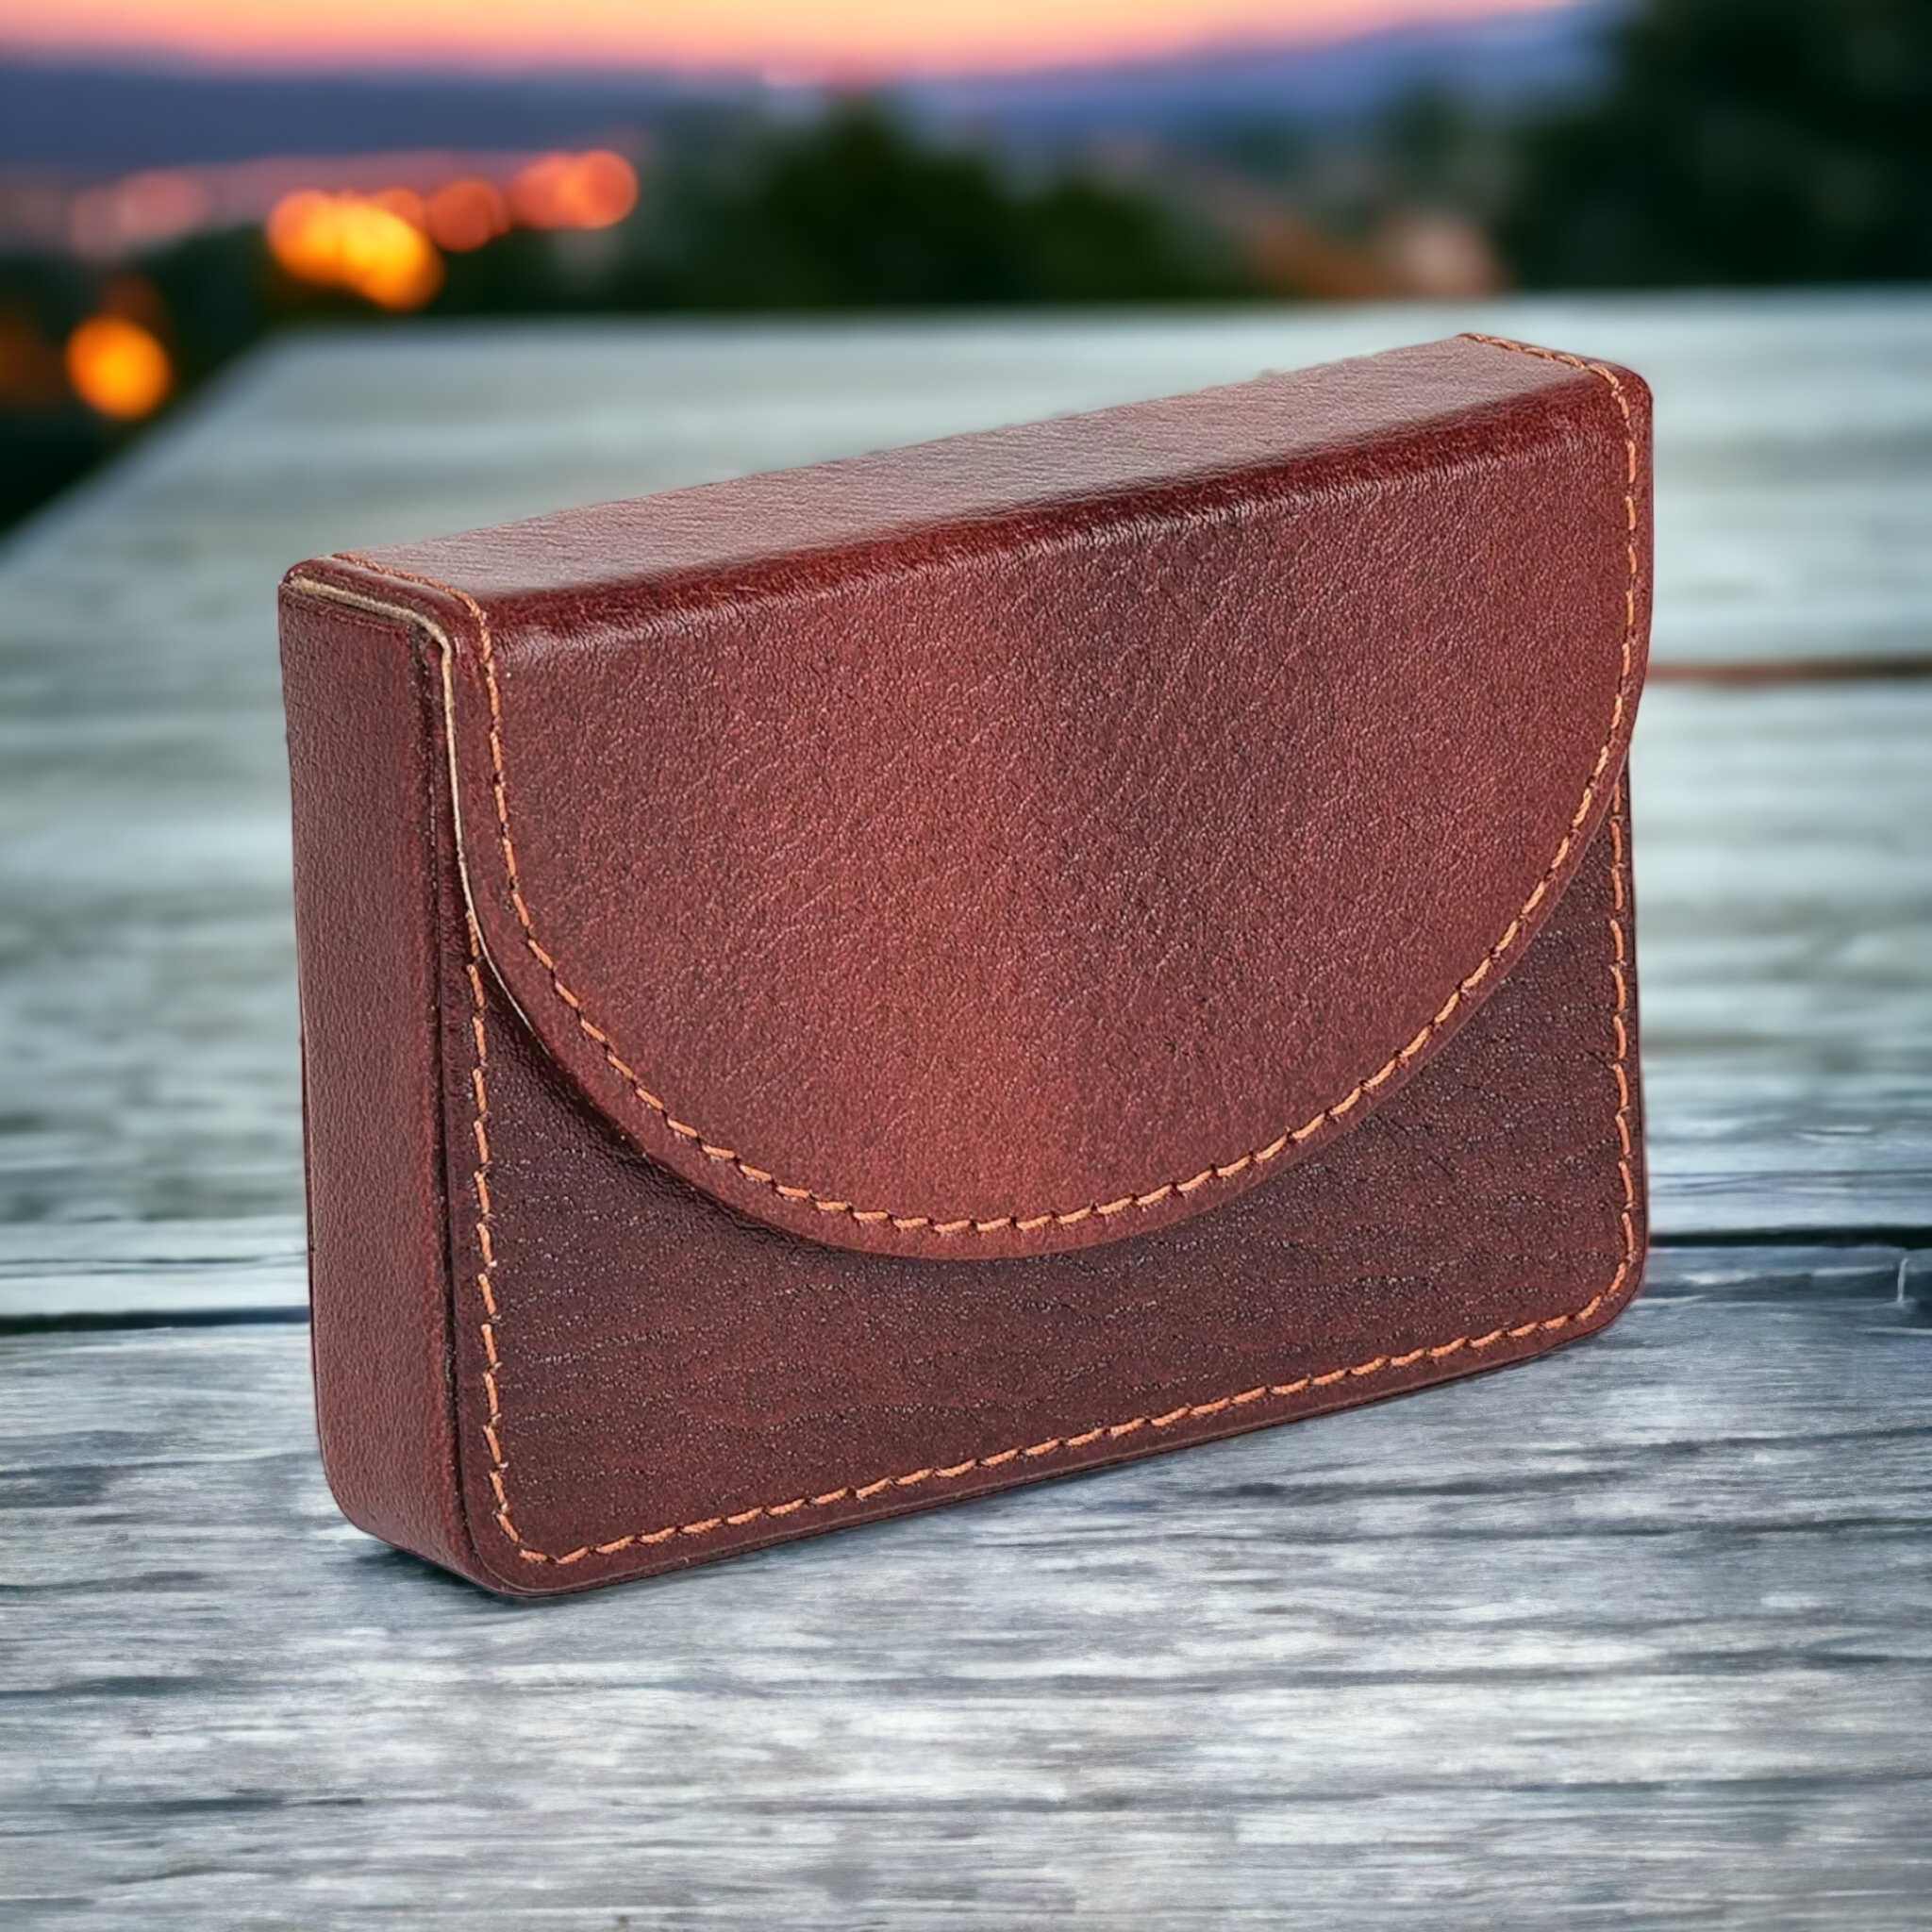 20 Best Front Pocket Wallets, According to Our Editors